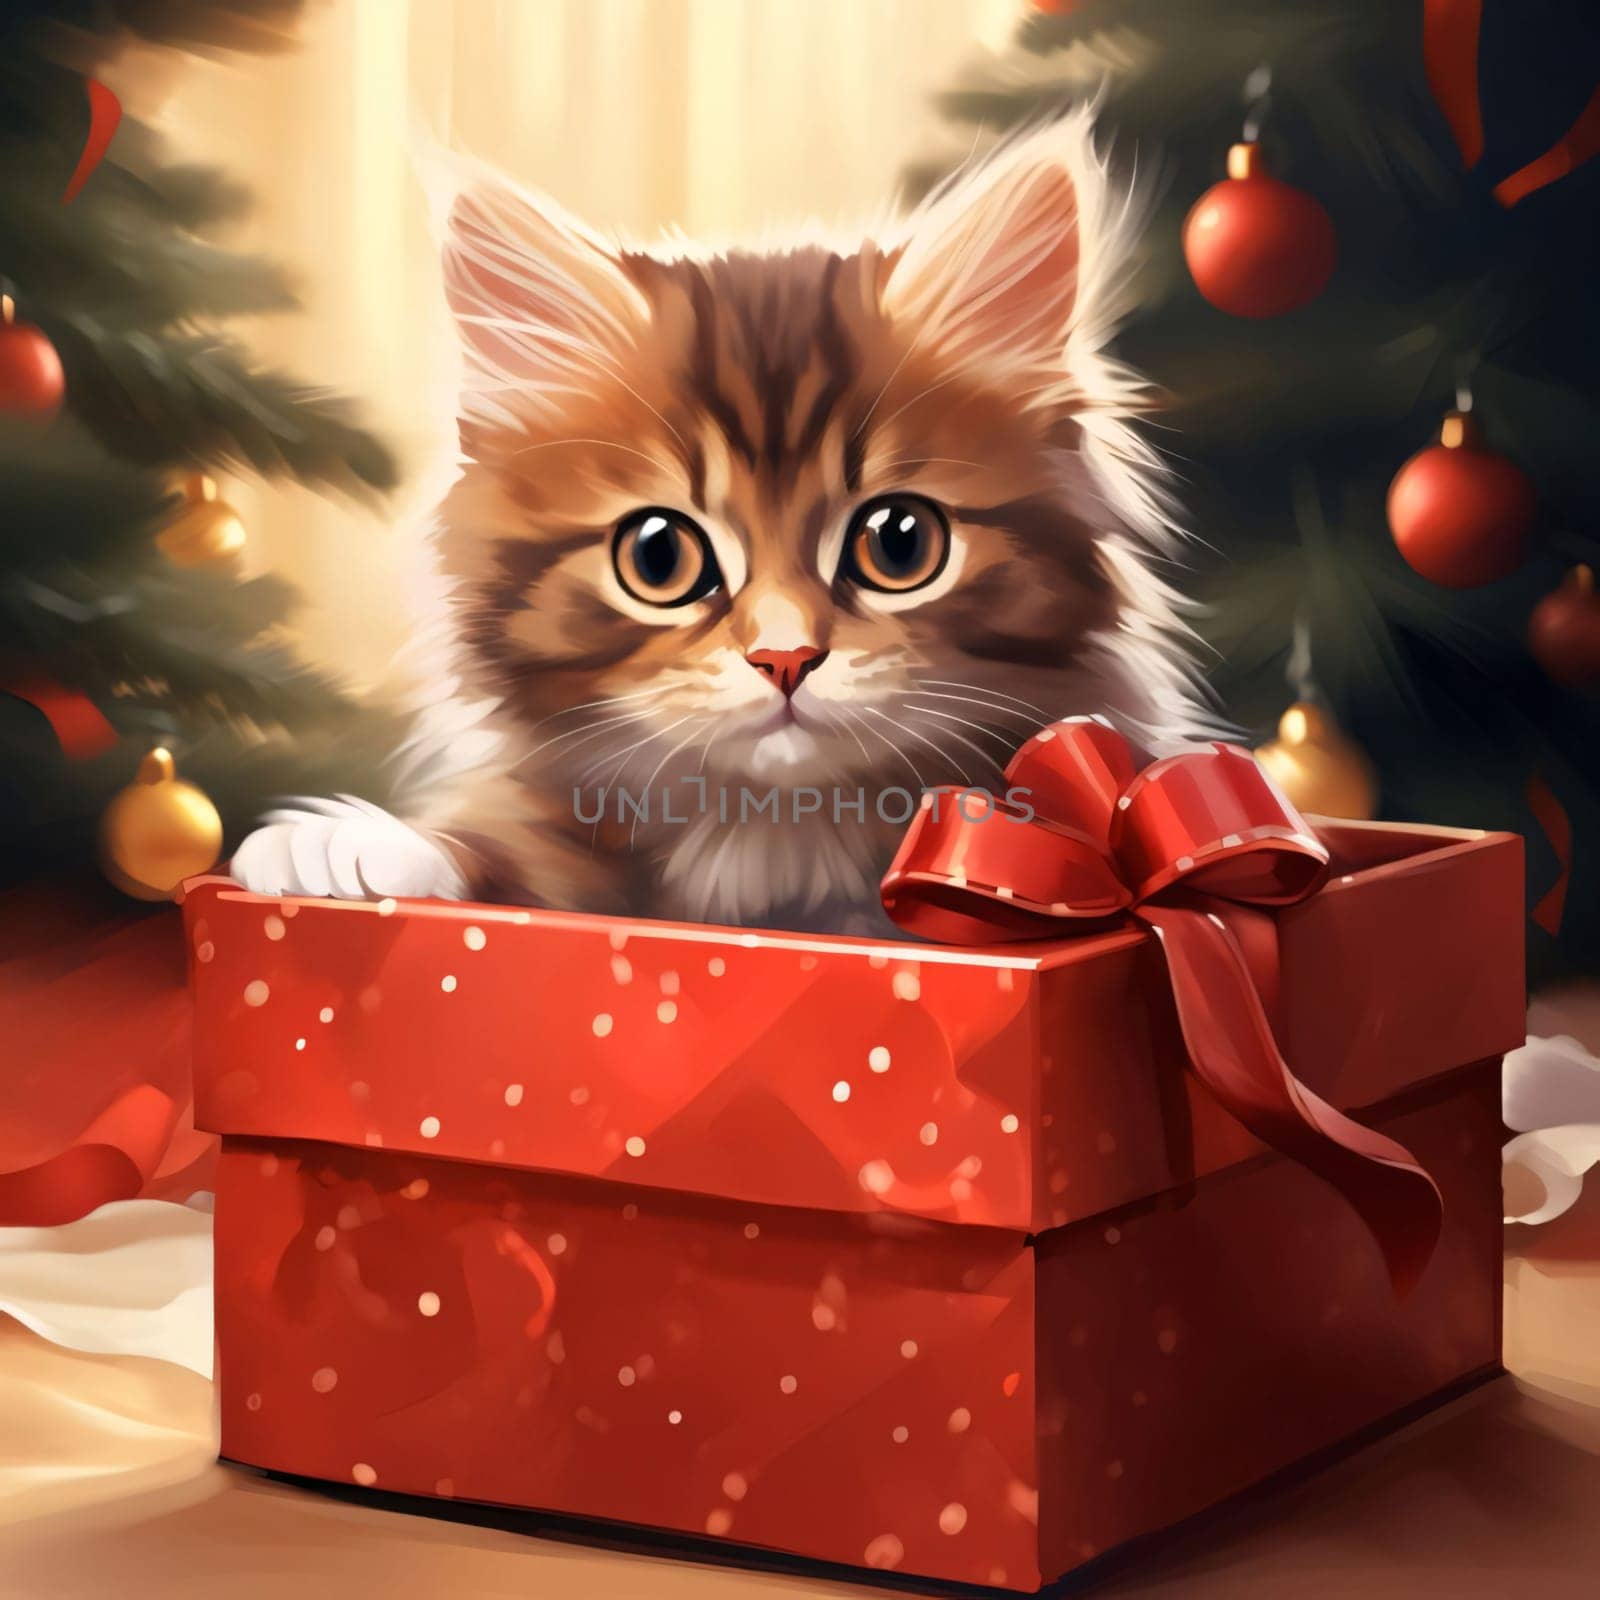 A tiny cat in a red box, a gift with bows. Gifts as a day symbol of present and love. by ThemesS